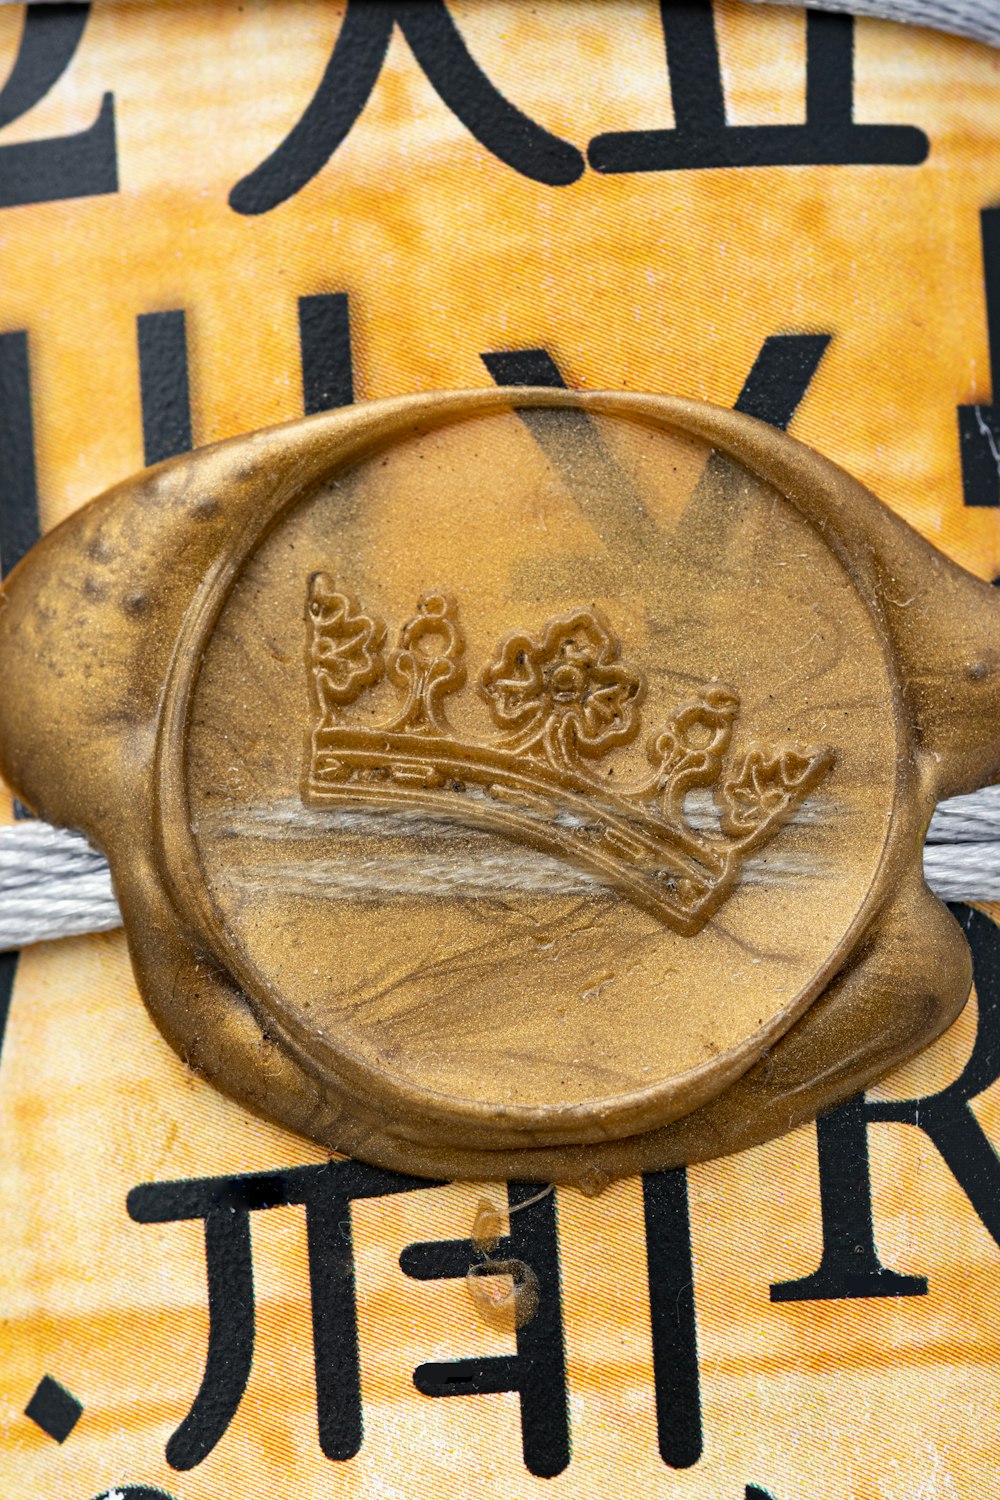 a close up of a metal object with a crown on it